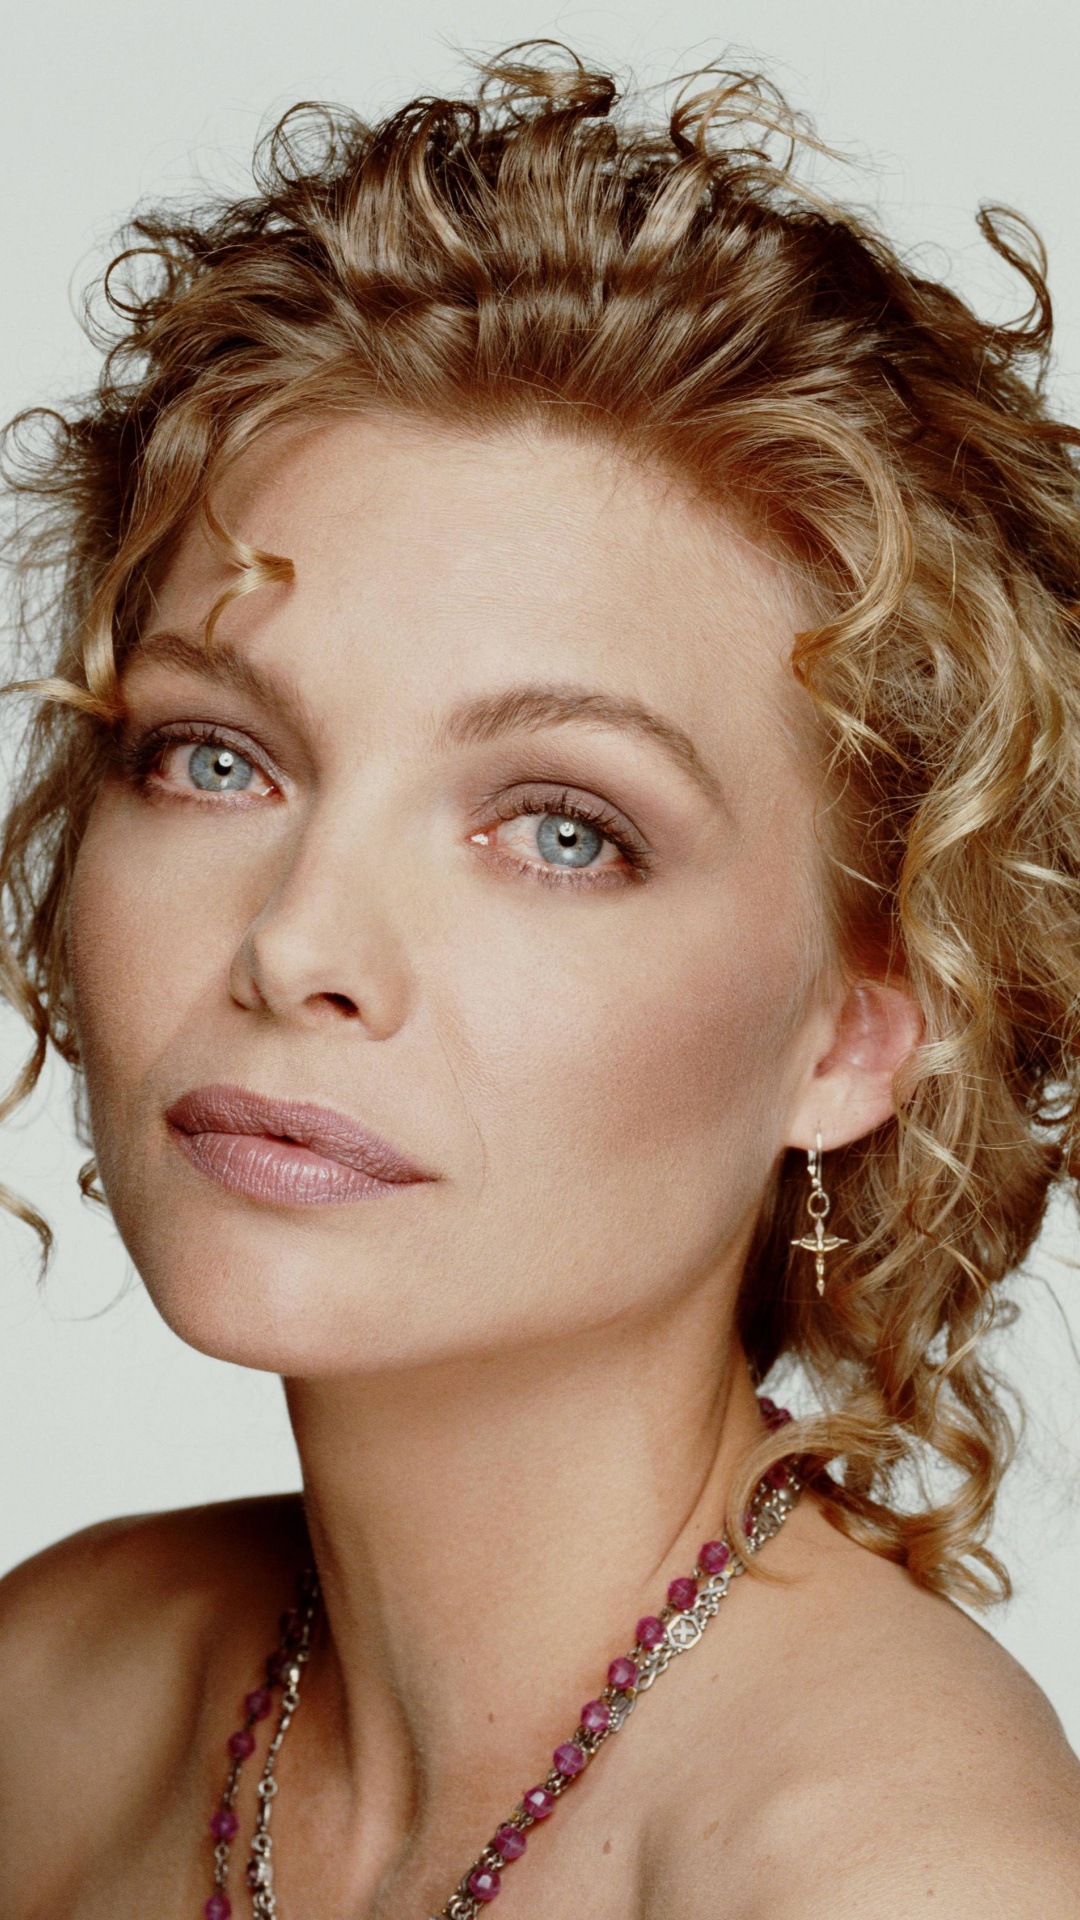 Michelle Pfeiffer, Download wallpapers, High resolution, Mobile, 1080x1920 Full HD Handy